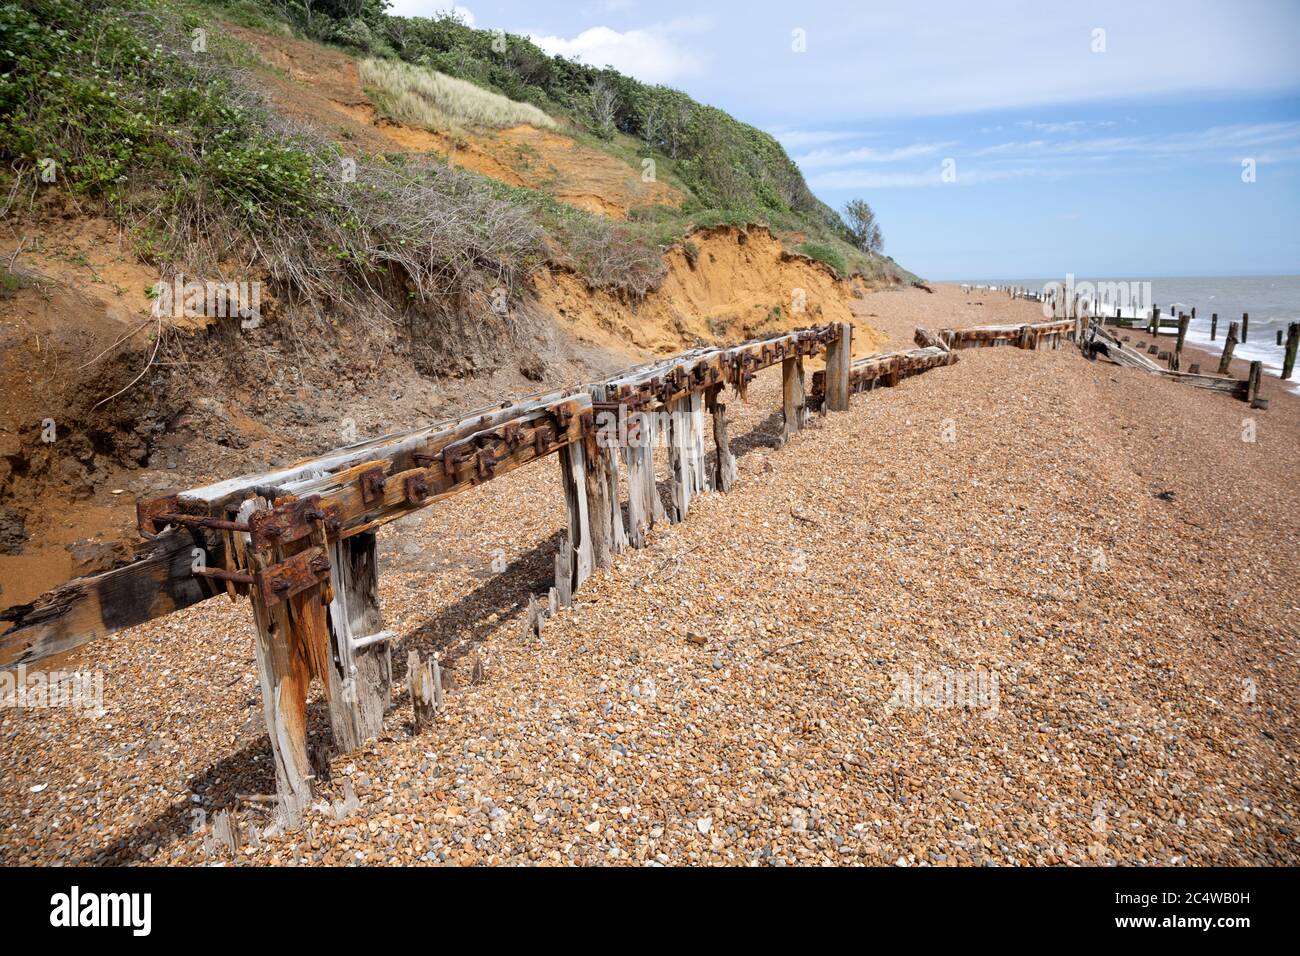 Remnants of old coastal defences and groins most 1940s anti-invasion military structures, Bawdsey, Suffolk, England, UK Stock Photo